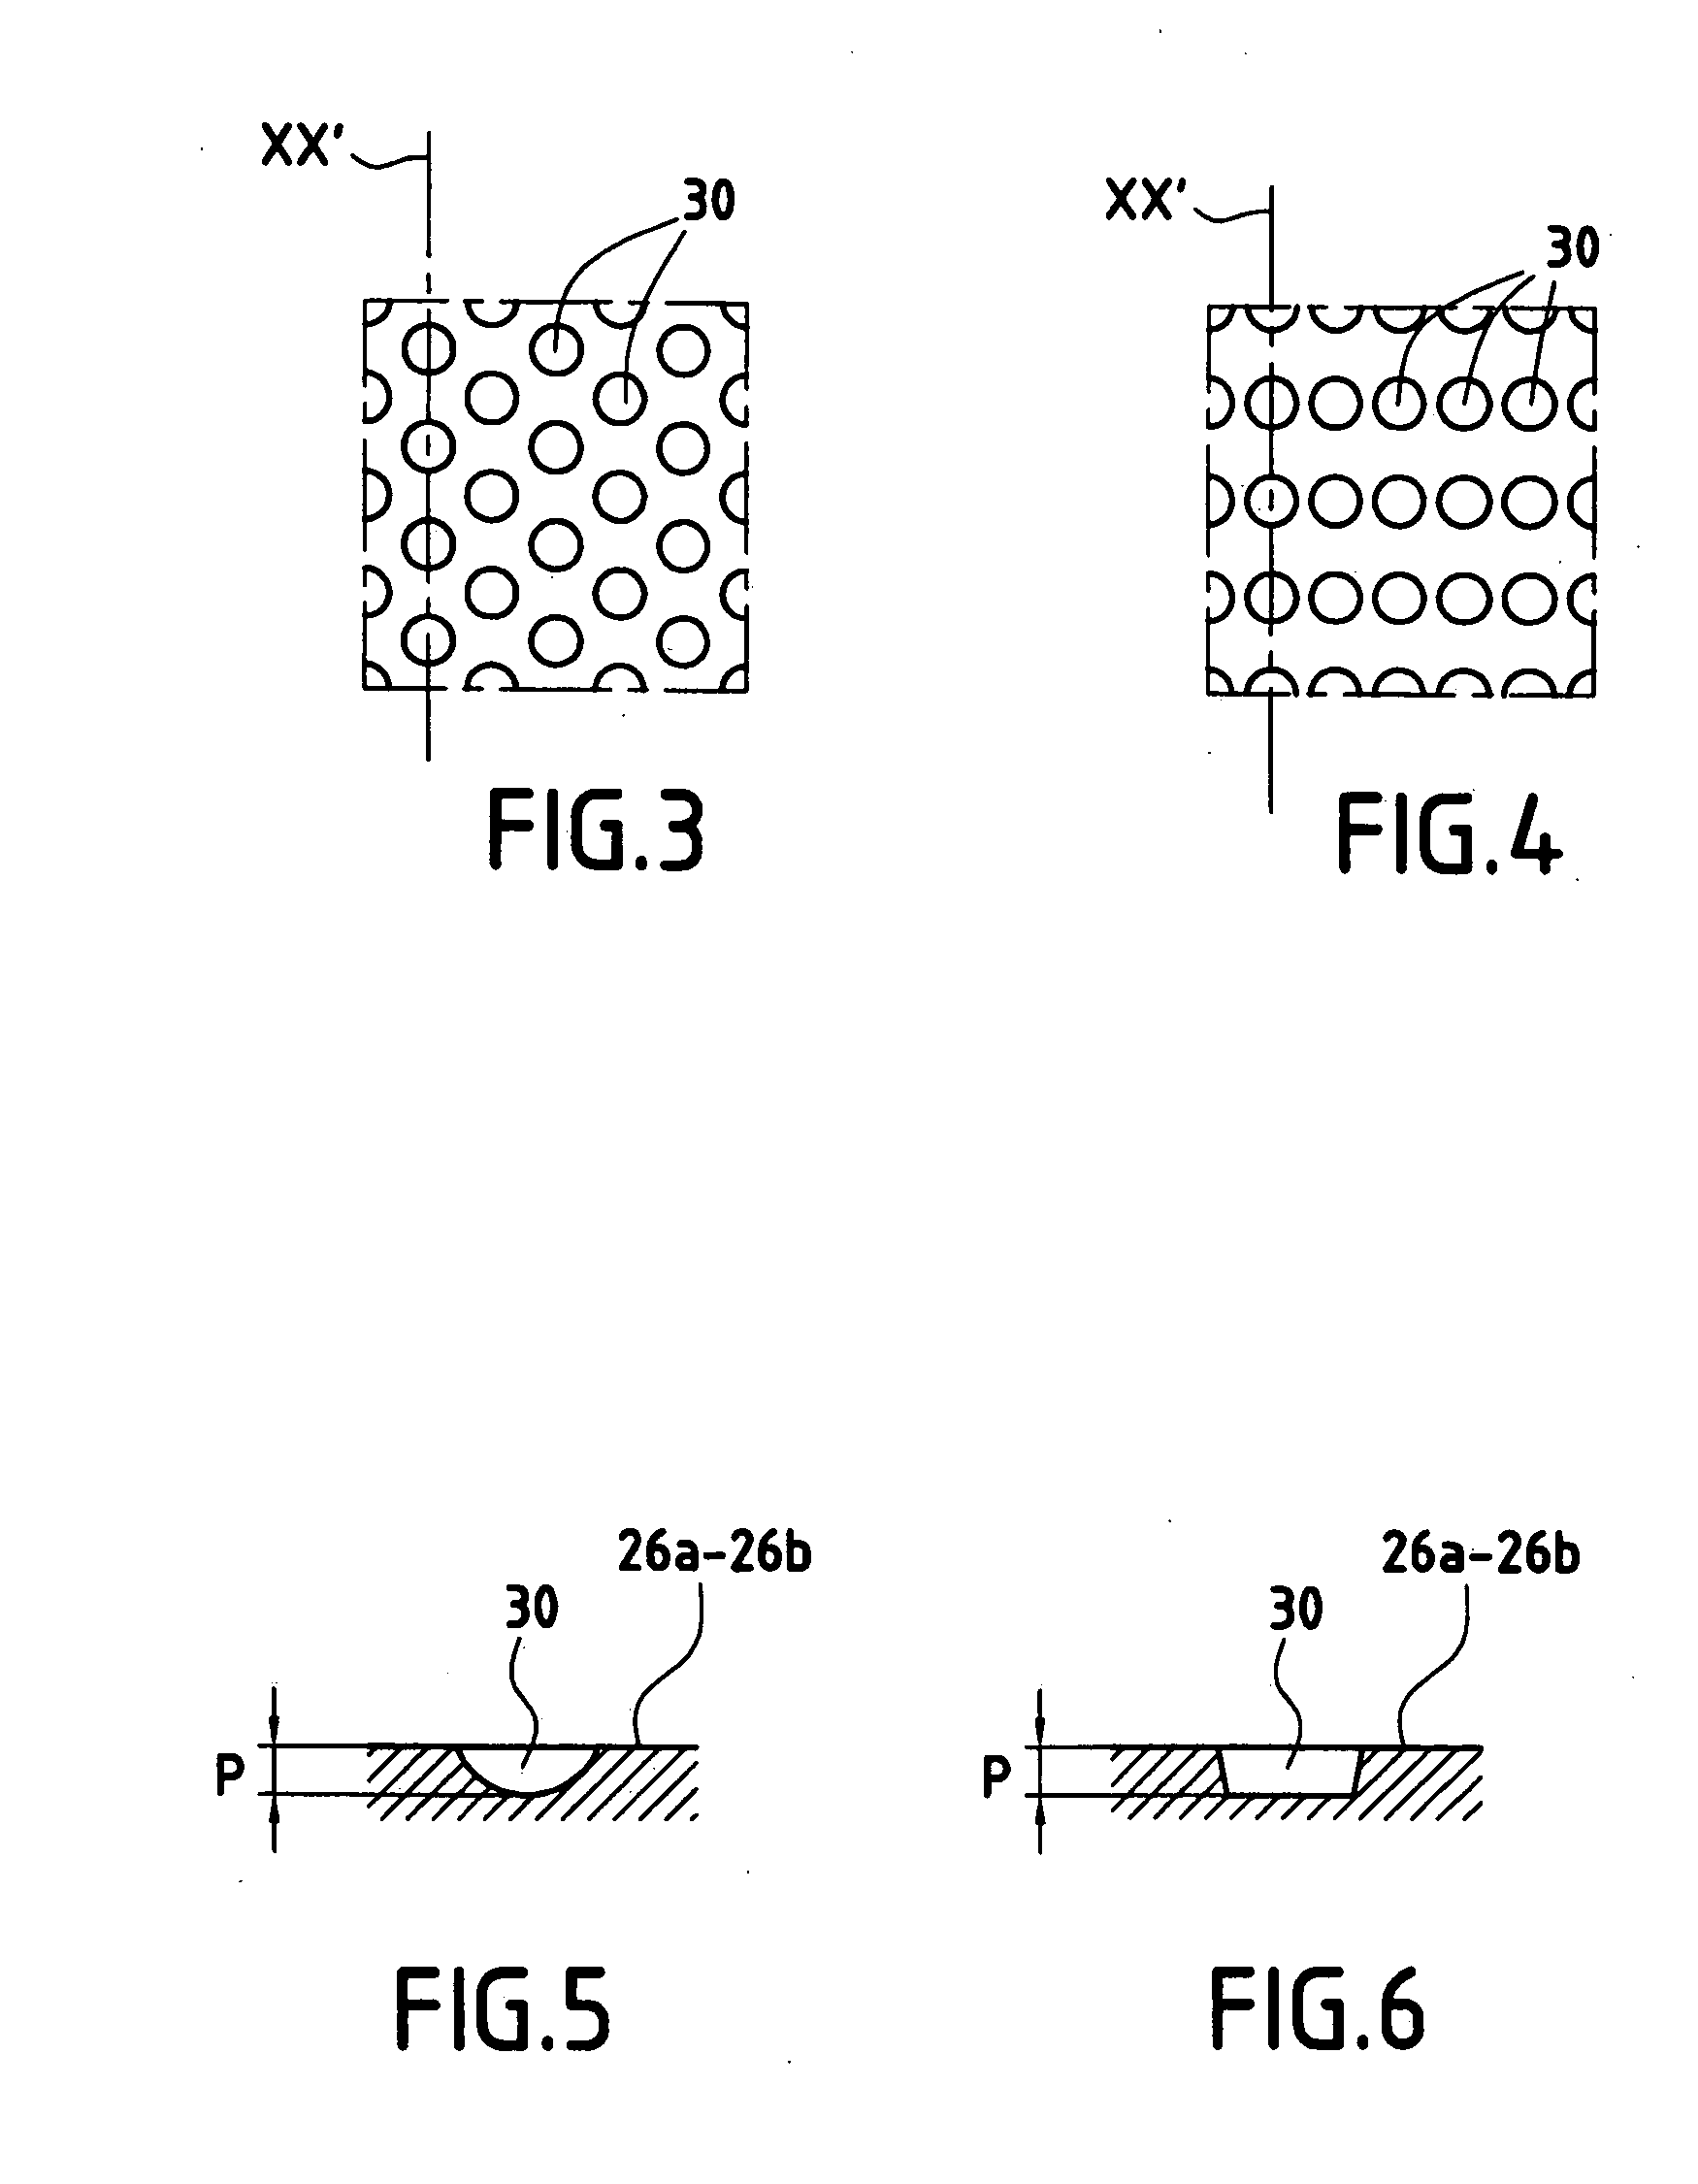 Gas turbine blade cooling circuit having a cavity with a high aspect ratio